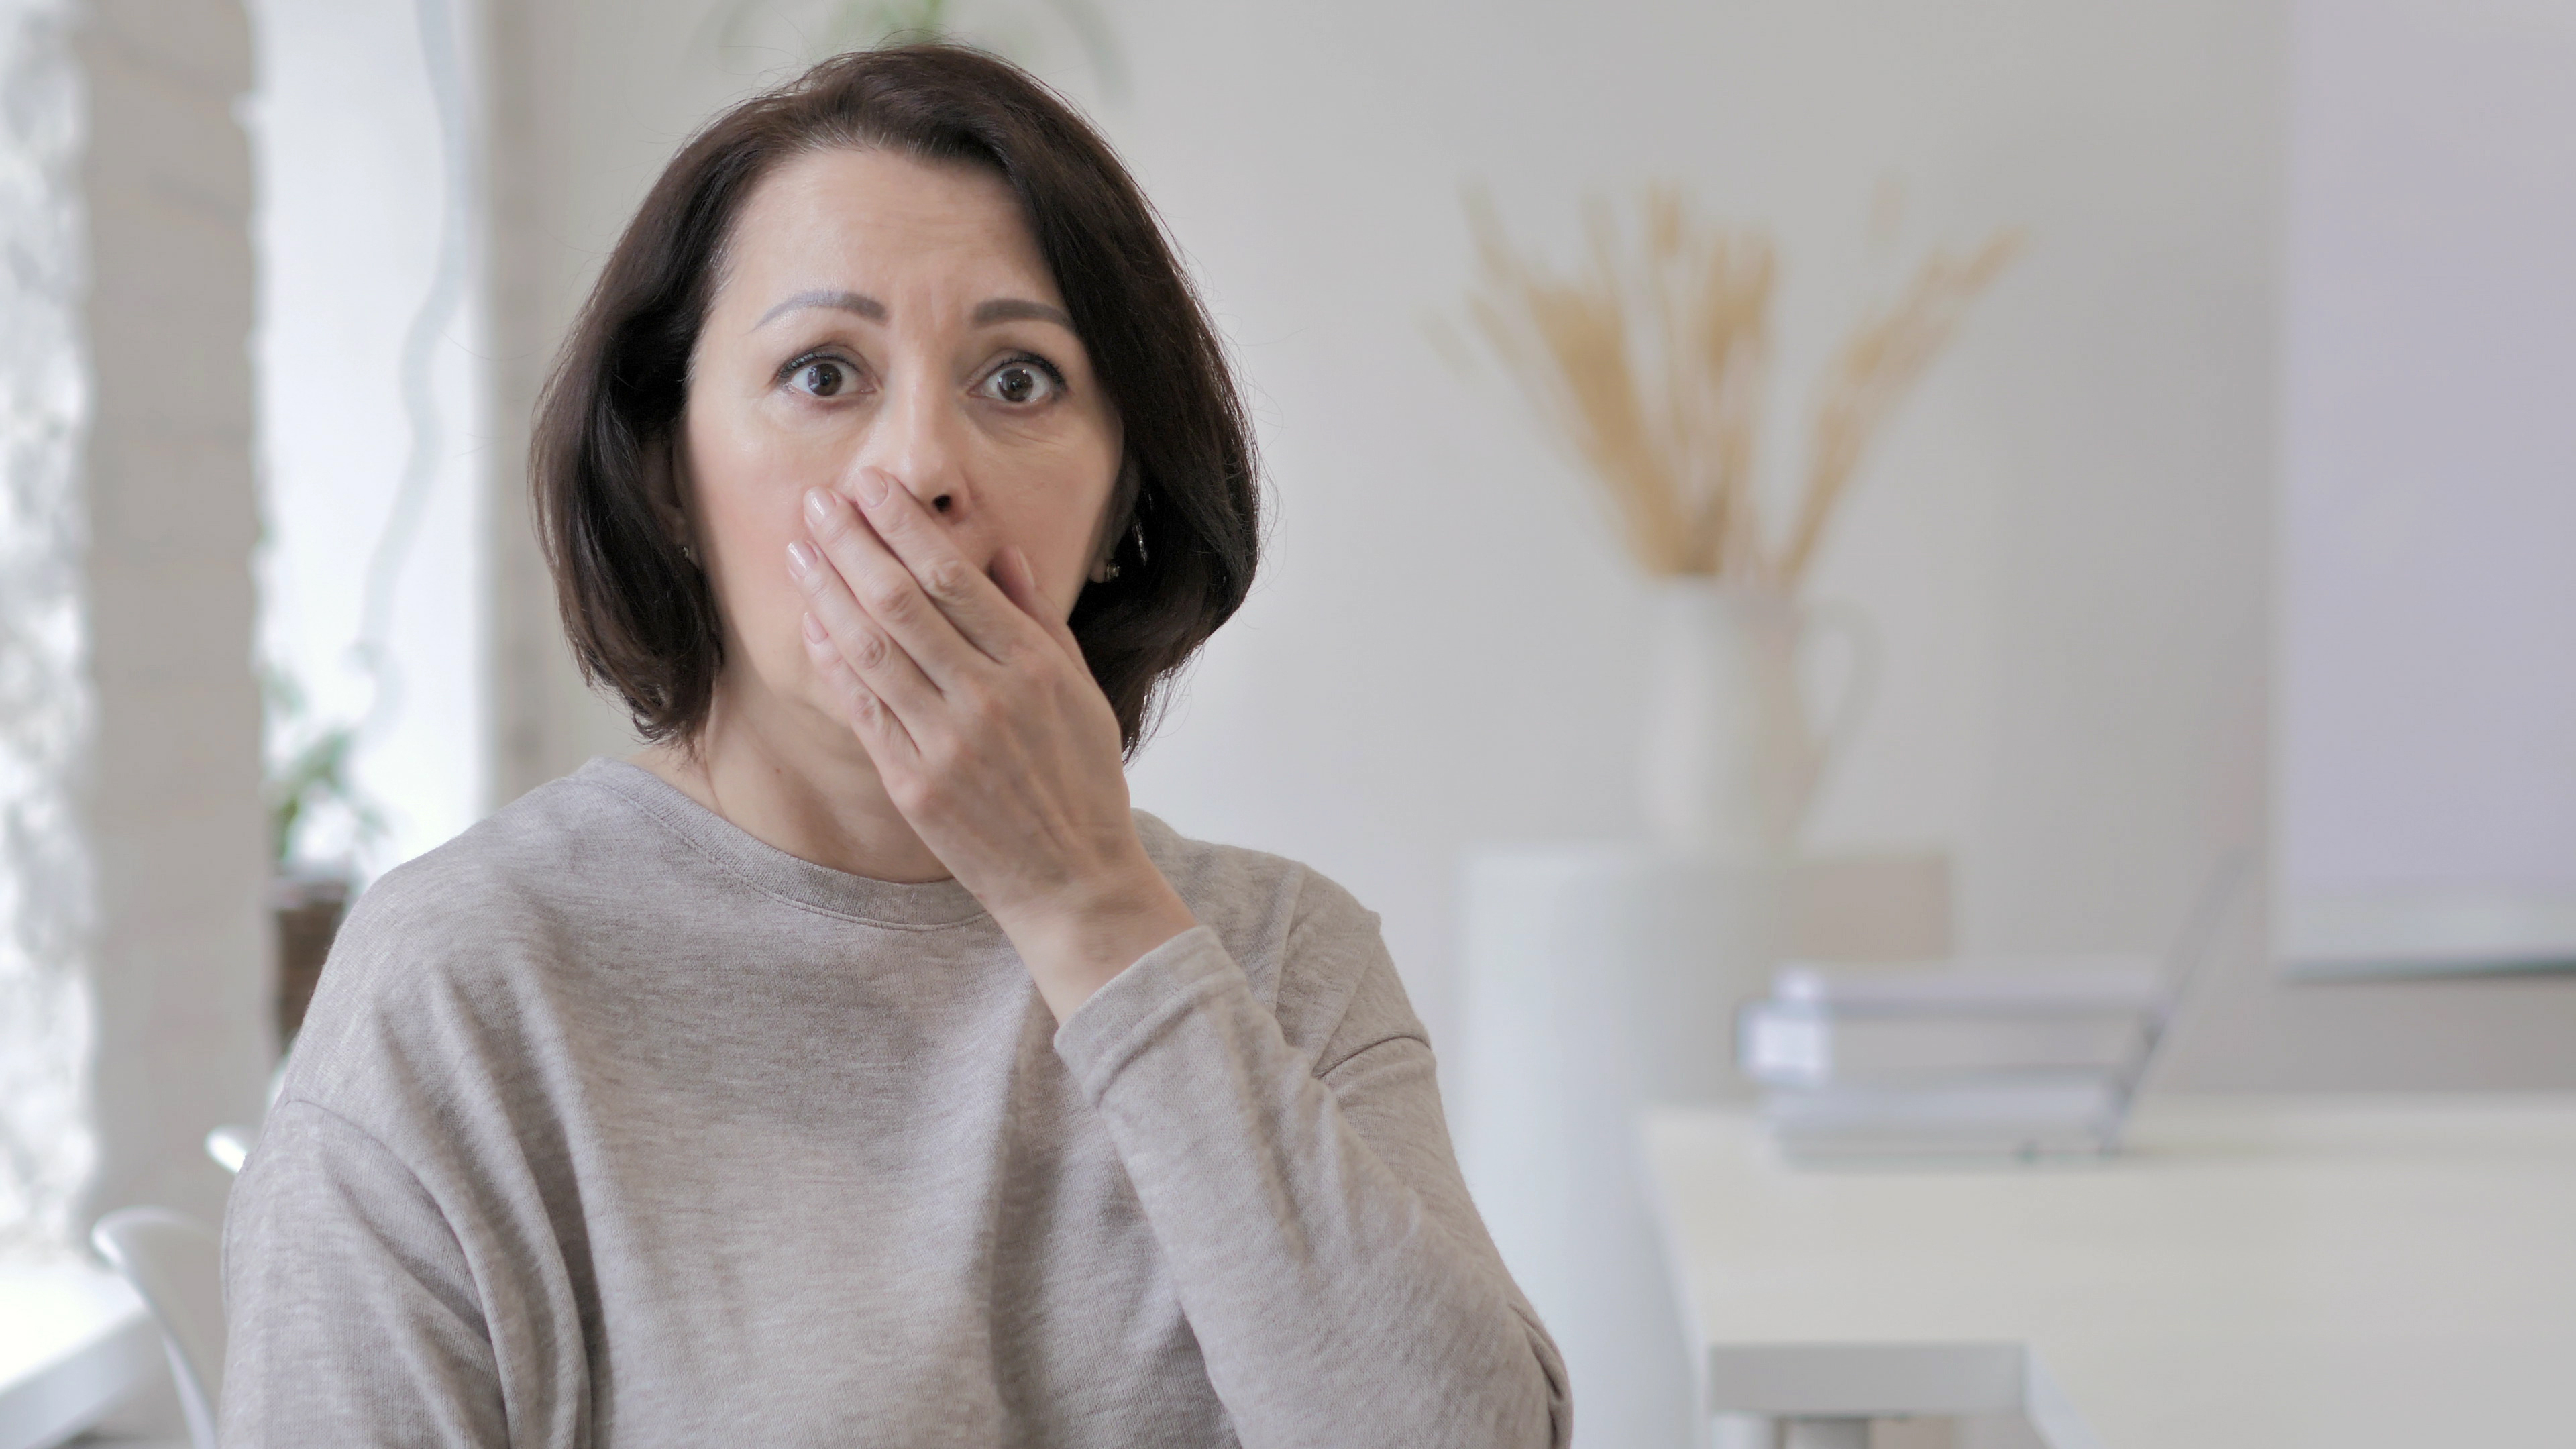 A shocked woman with her hand on her mouth | Source: Shutterstock